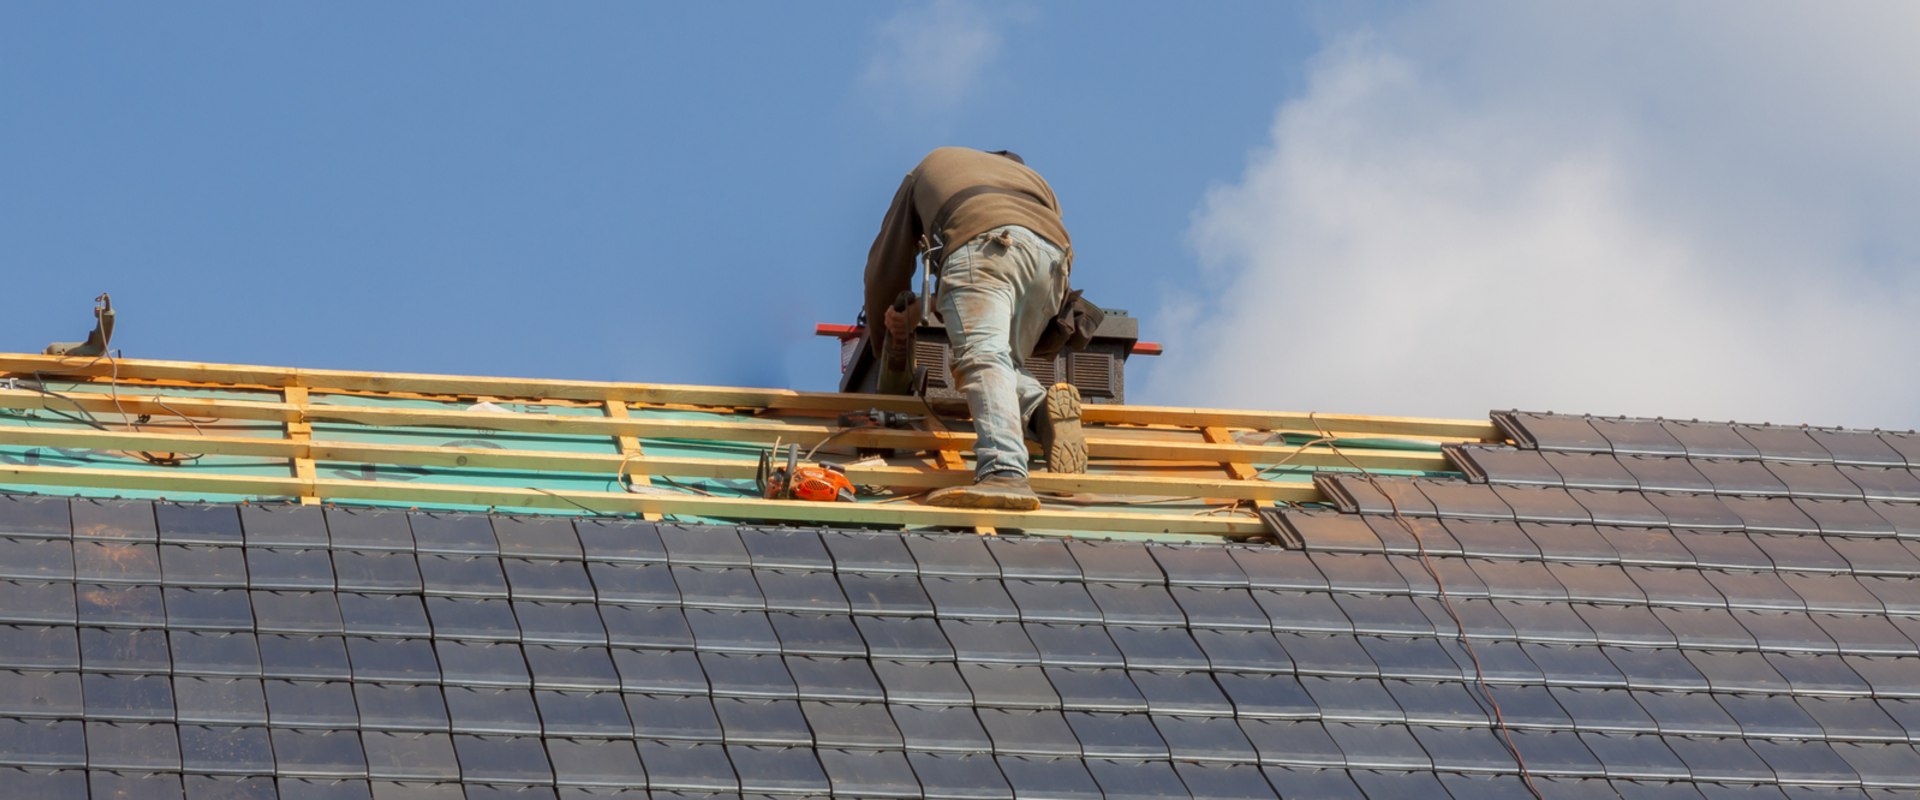 Civil Engineering Projects In Houston, TX: How A Roofing Contractor Can Assist?